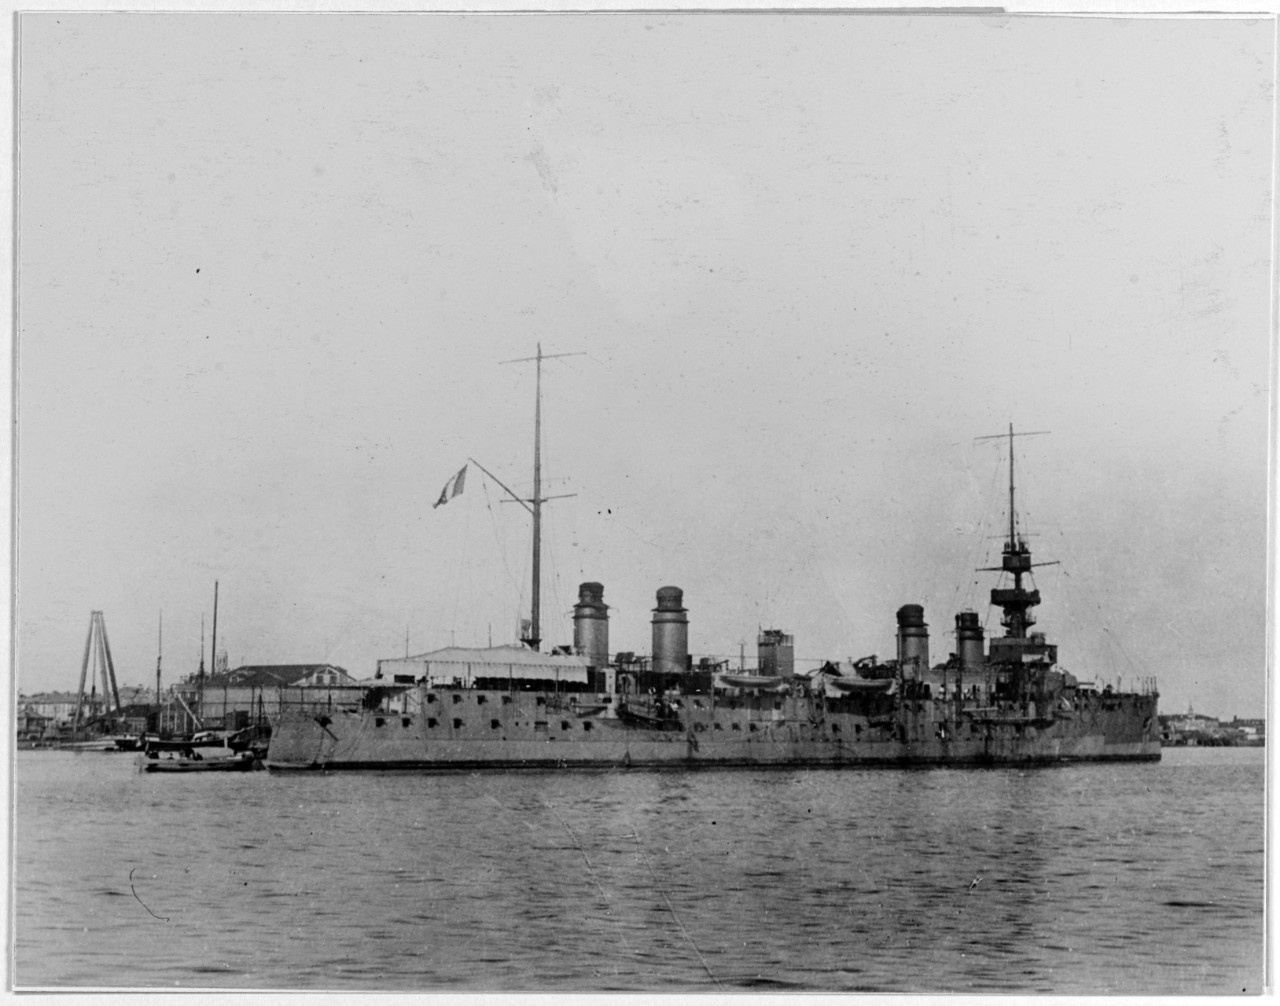 CONDE (French armored cruiser, 1902-1933)